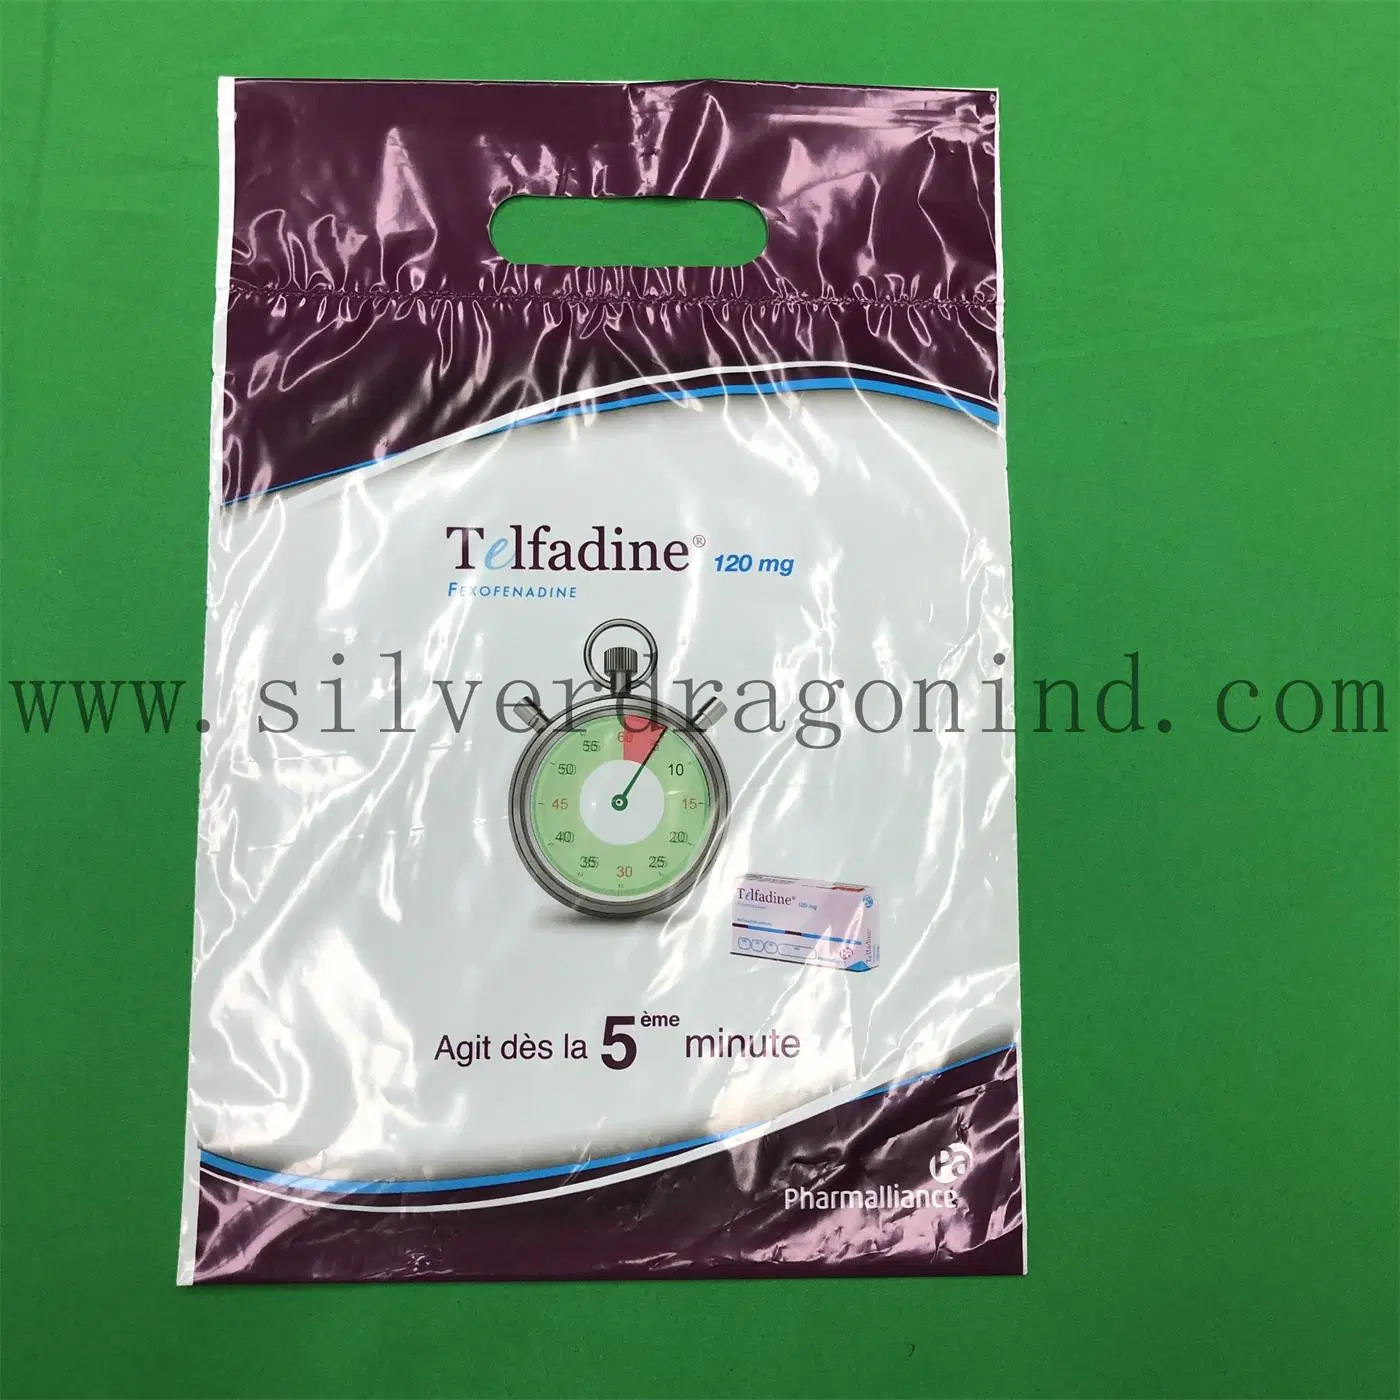 Printed Plastic Gift Bags/Shopping Bags/Grocery Bags with Reinforced Punch Handle